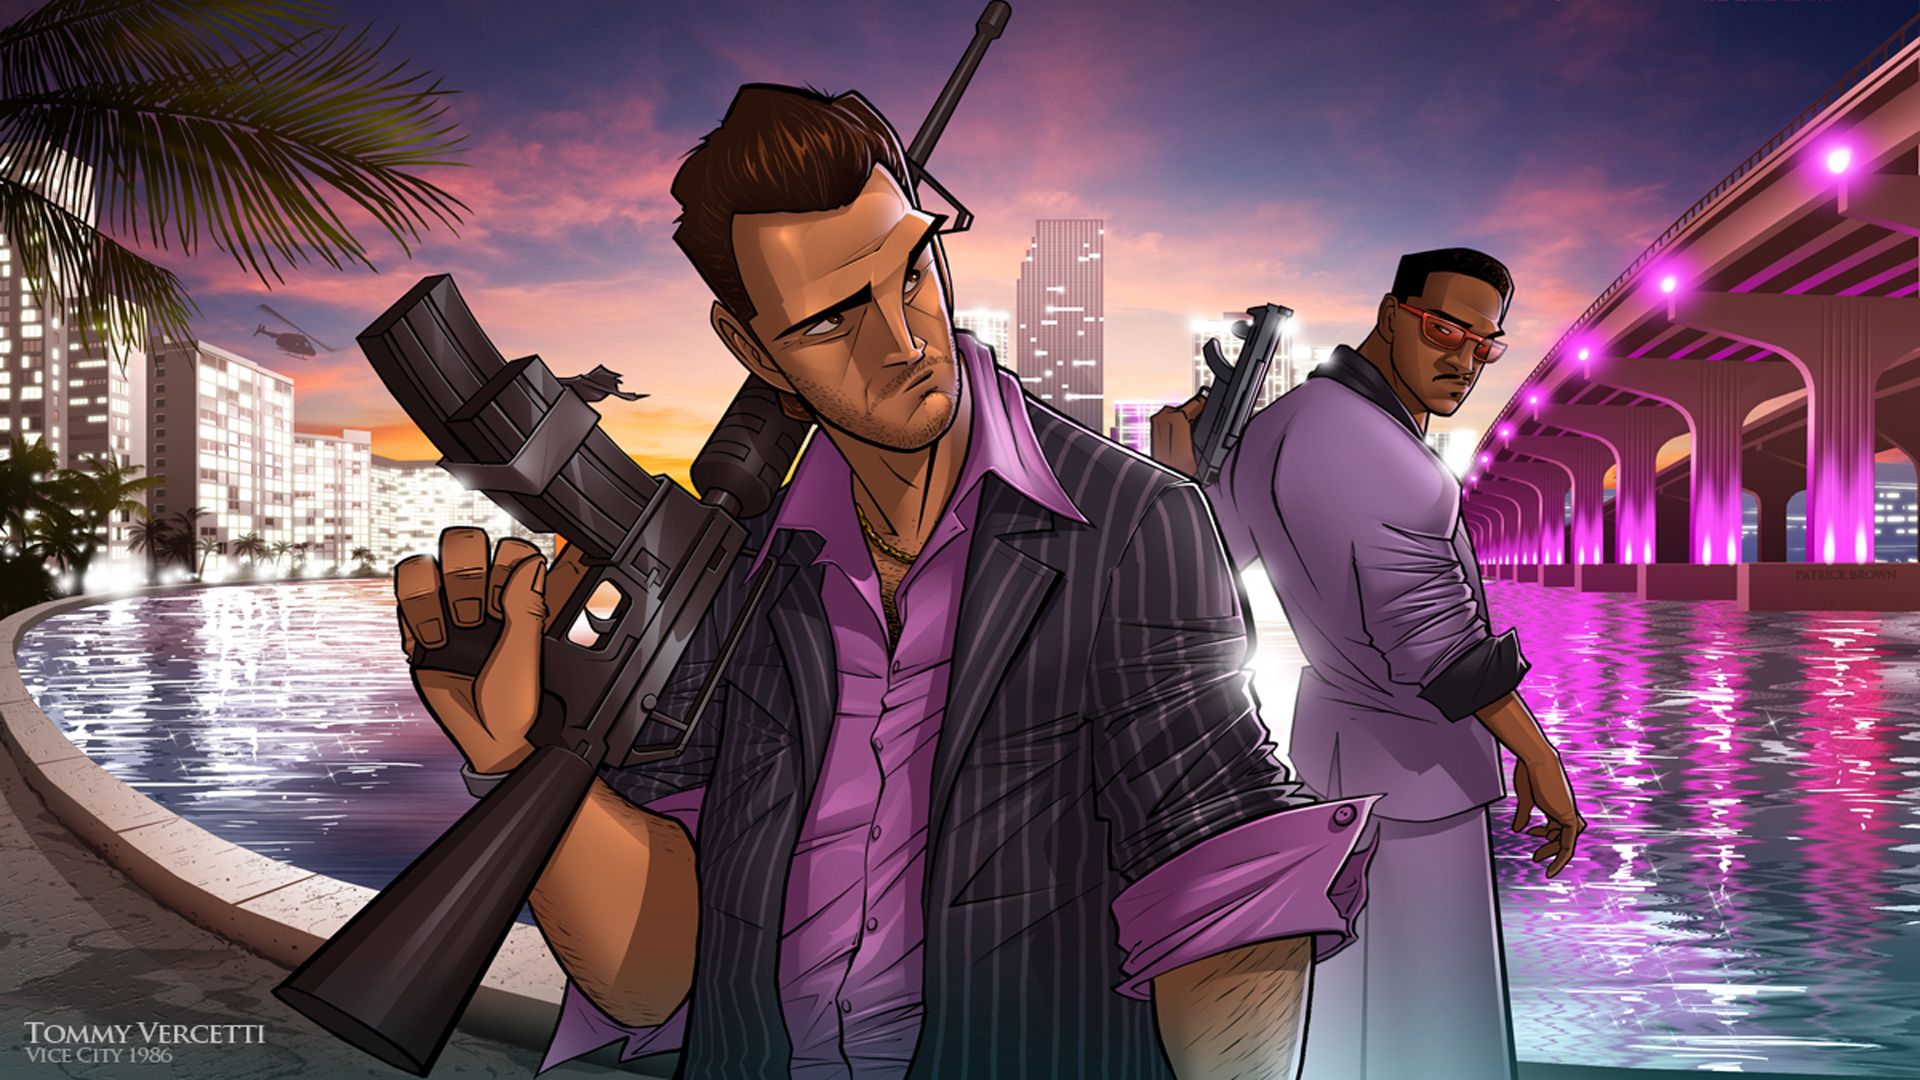 tommy vercetti, grand theft auto, vice city Wallpaper, HD Games 4K Wallpaper, Image, Photo and Background